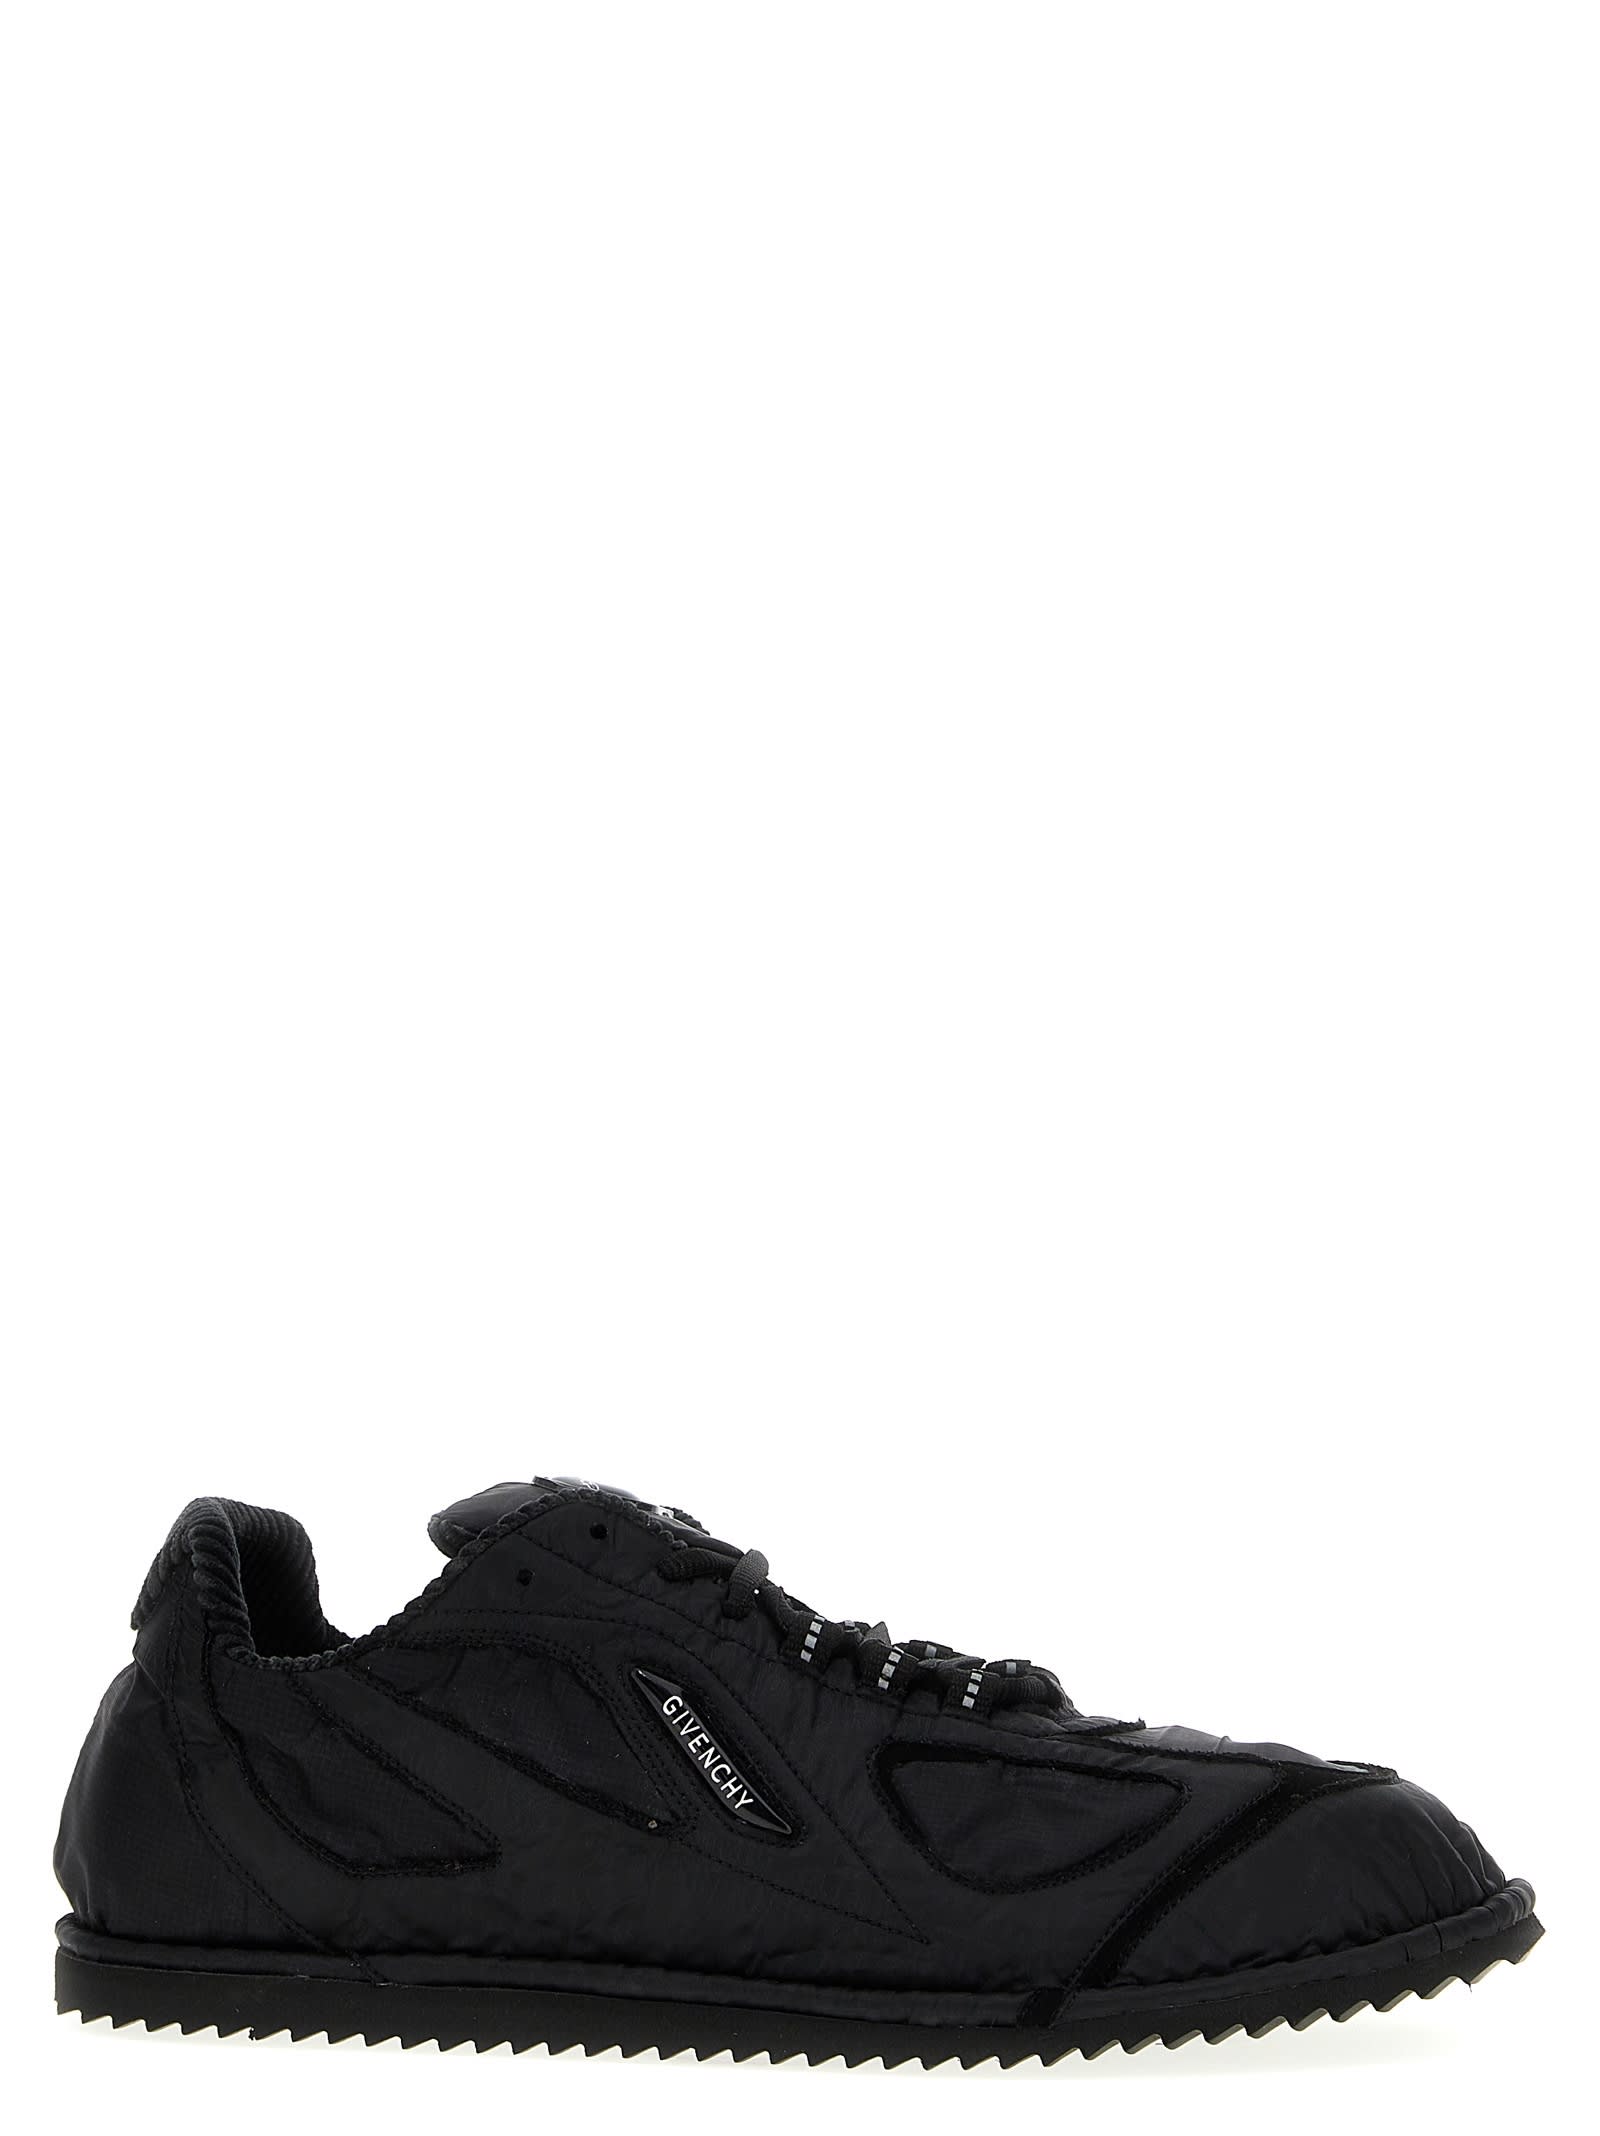 Givenchy Flat Sneakers In Black